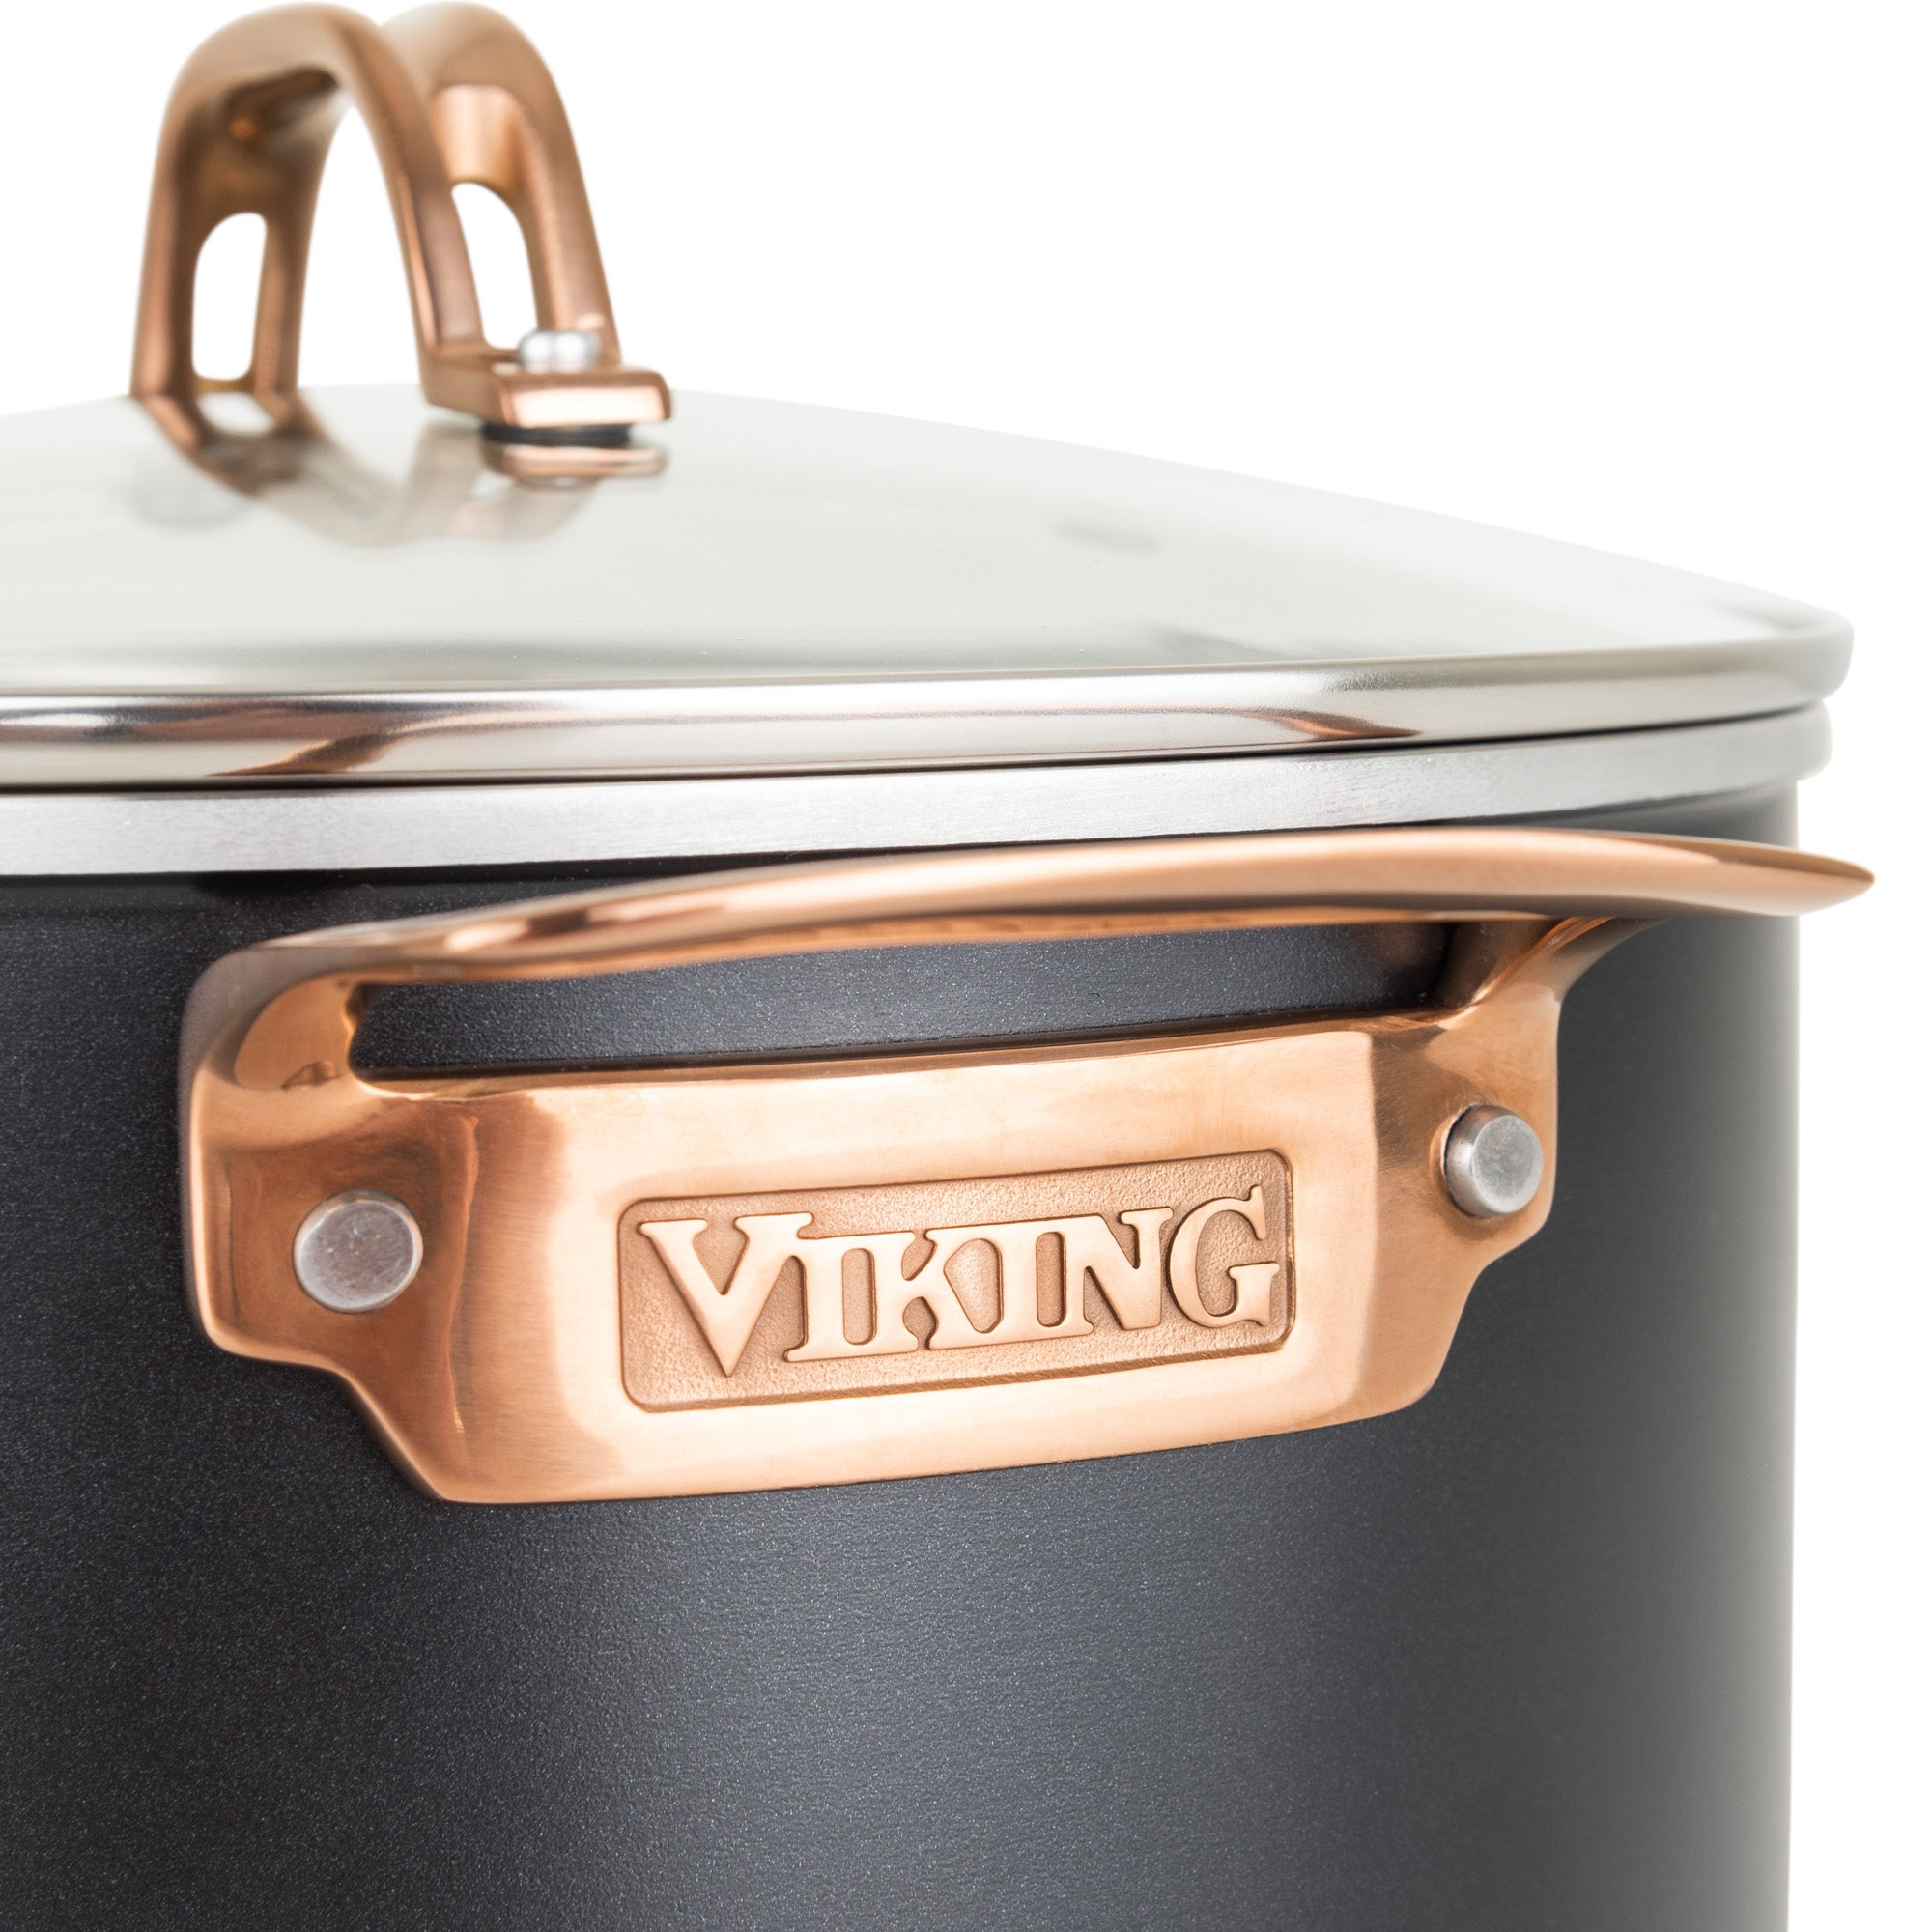 3-Ply Stainless 11-Piece Cookware Set (Black & Copper), Viking